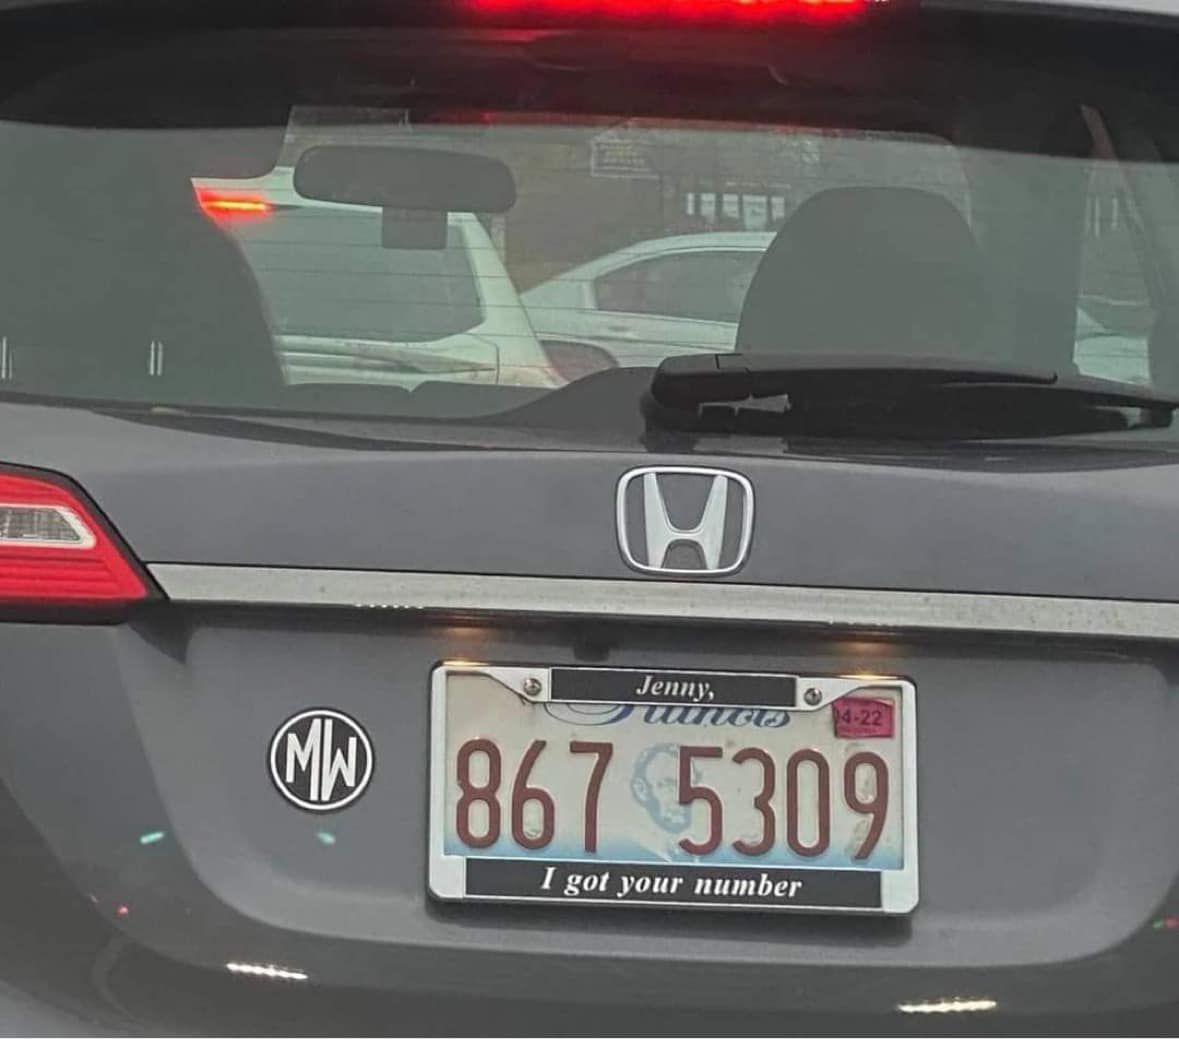 The perfect license plates DOES exist!